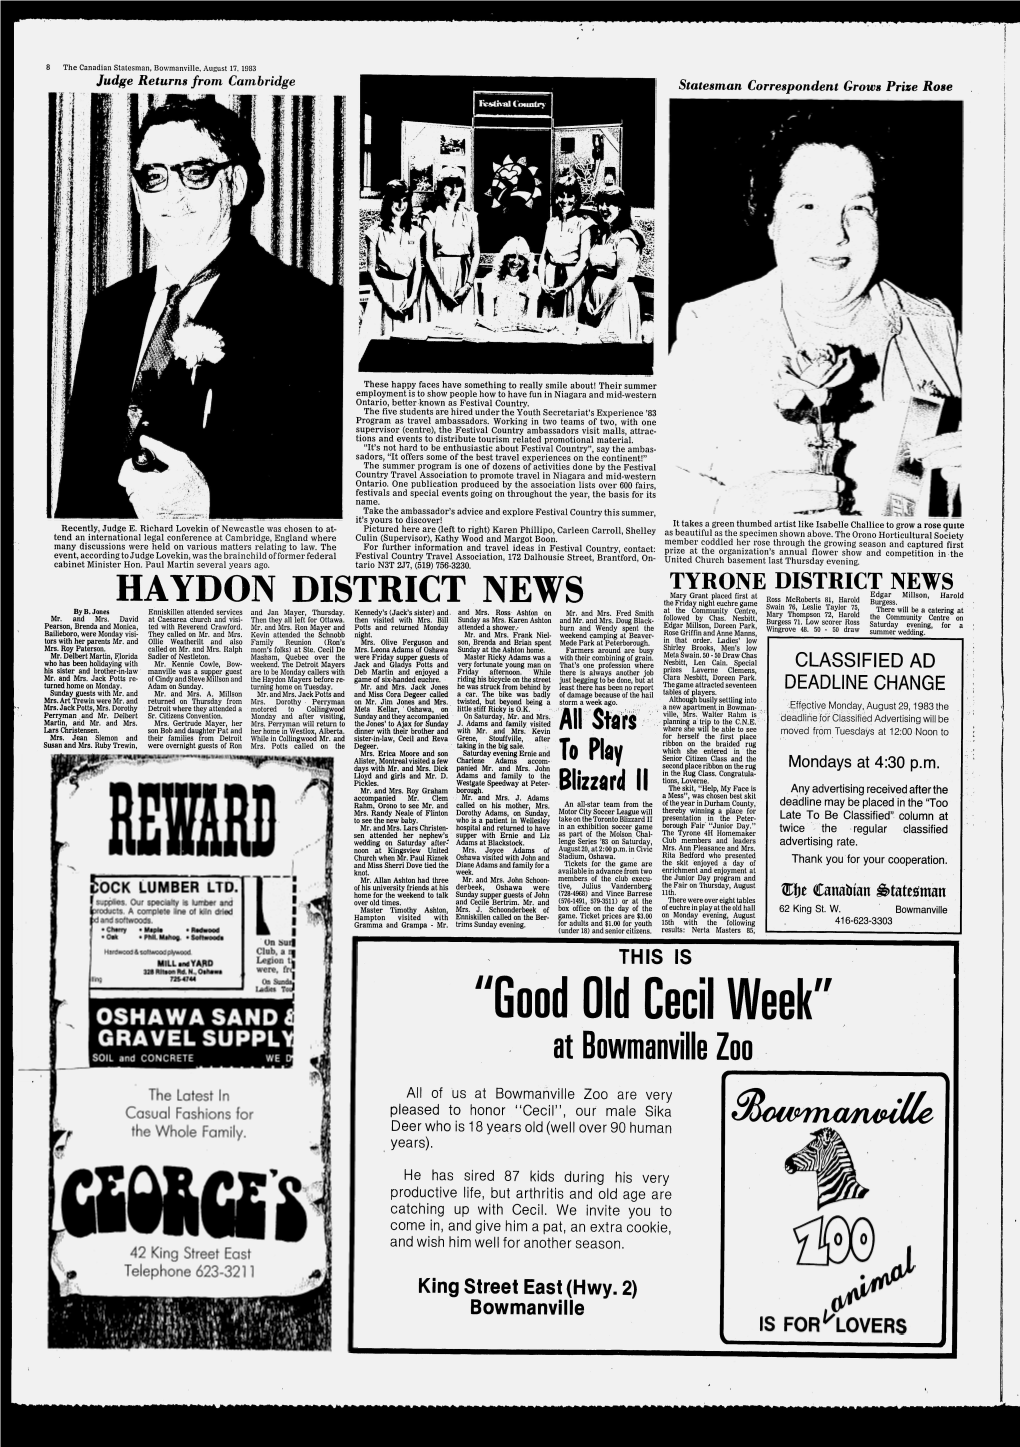 HAYDON DISTRICT NEWS at Bowmanville